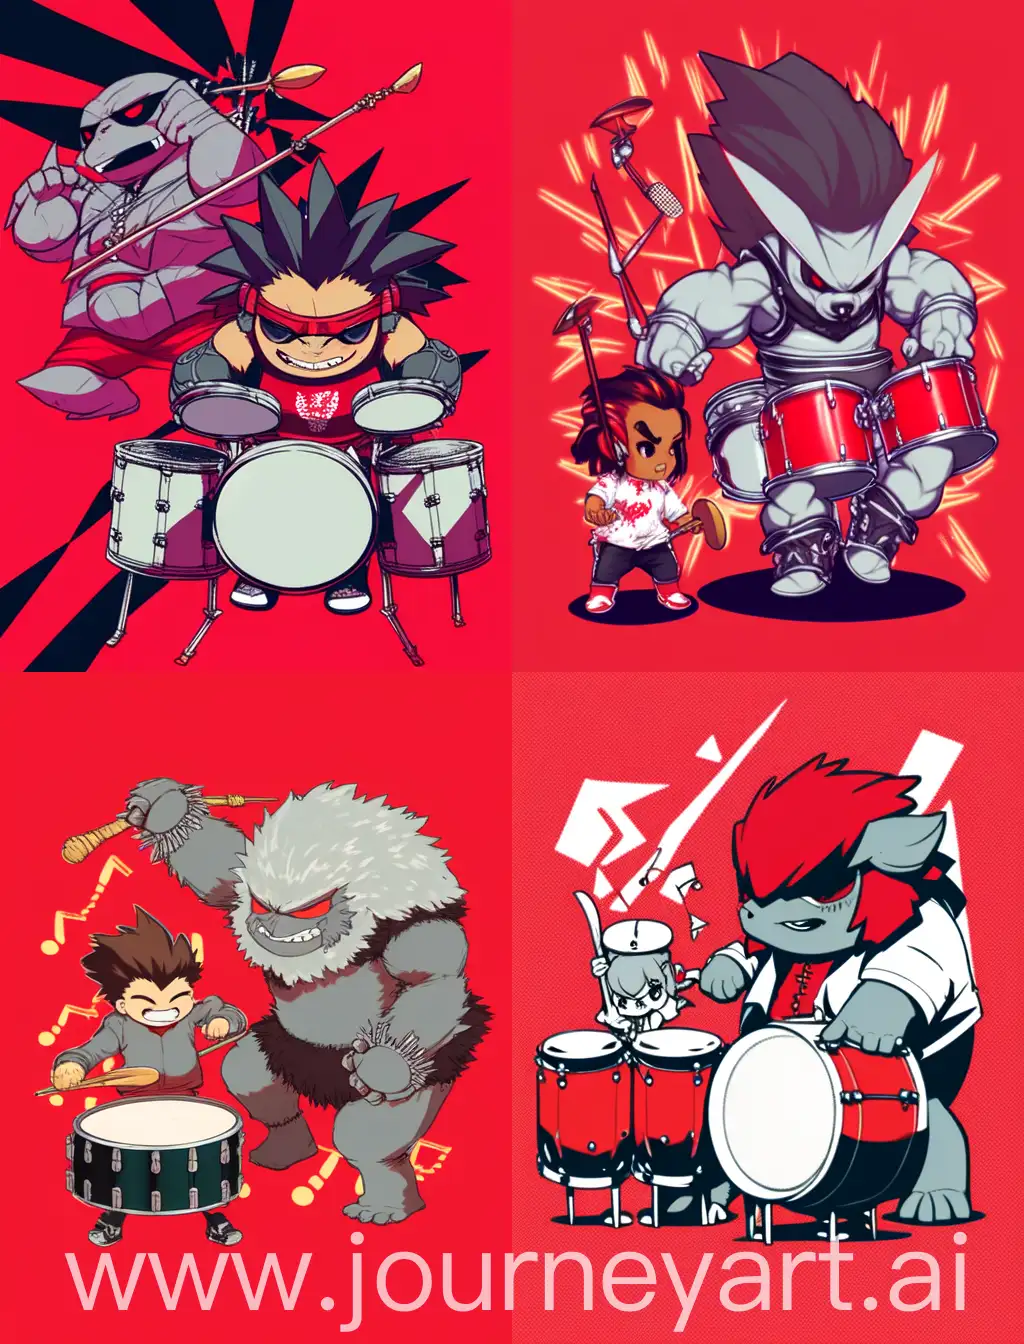 Chibi-Gorilla-and-Anime-Guy-Drumming-Dynamic-Duo-on-a-Vibrant-Red-Stage